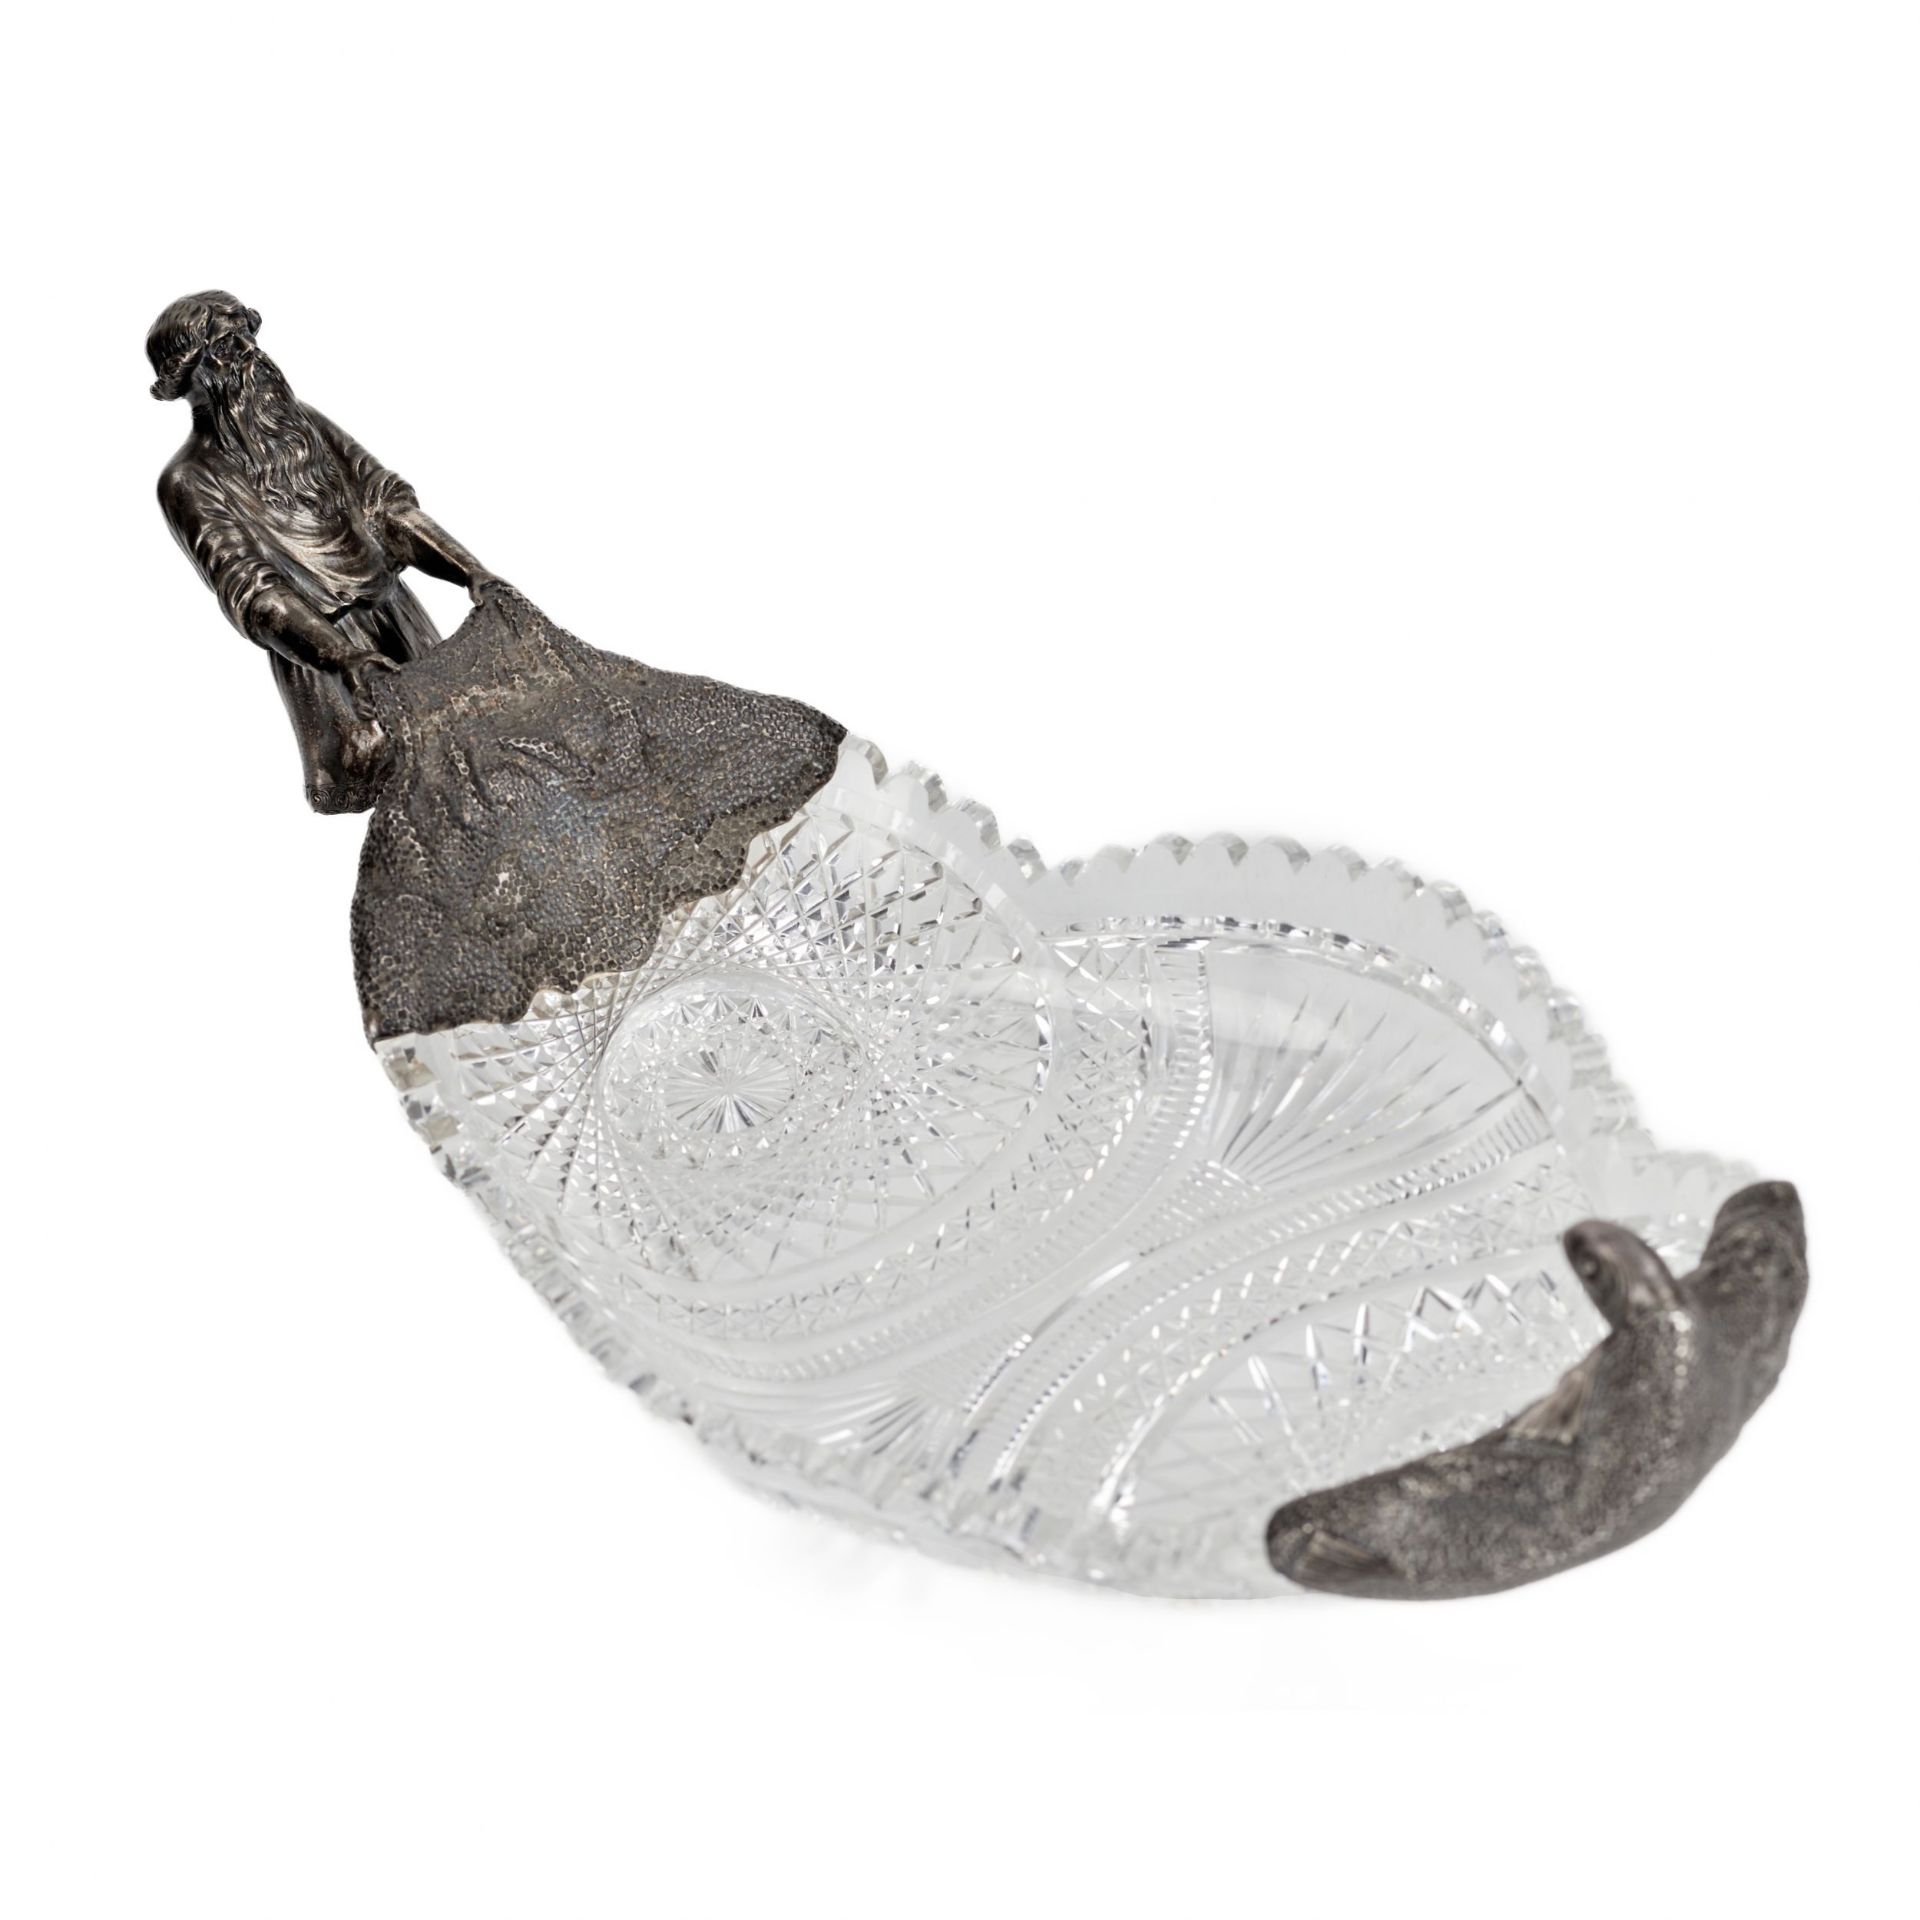 Crystal dish in silver 14 artels of jewelers. The Tale of the Fisherman and the Fish. Moscow 1908-19 - Image 4 of 11